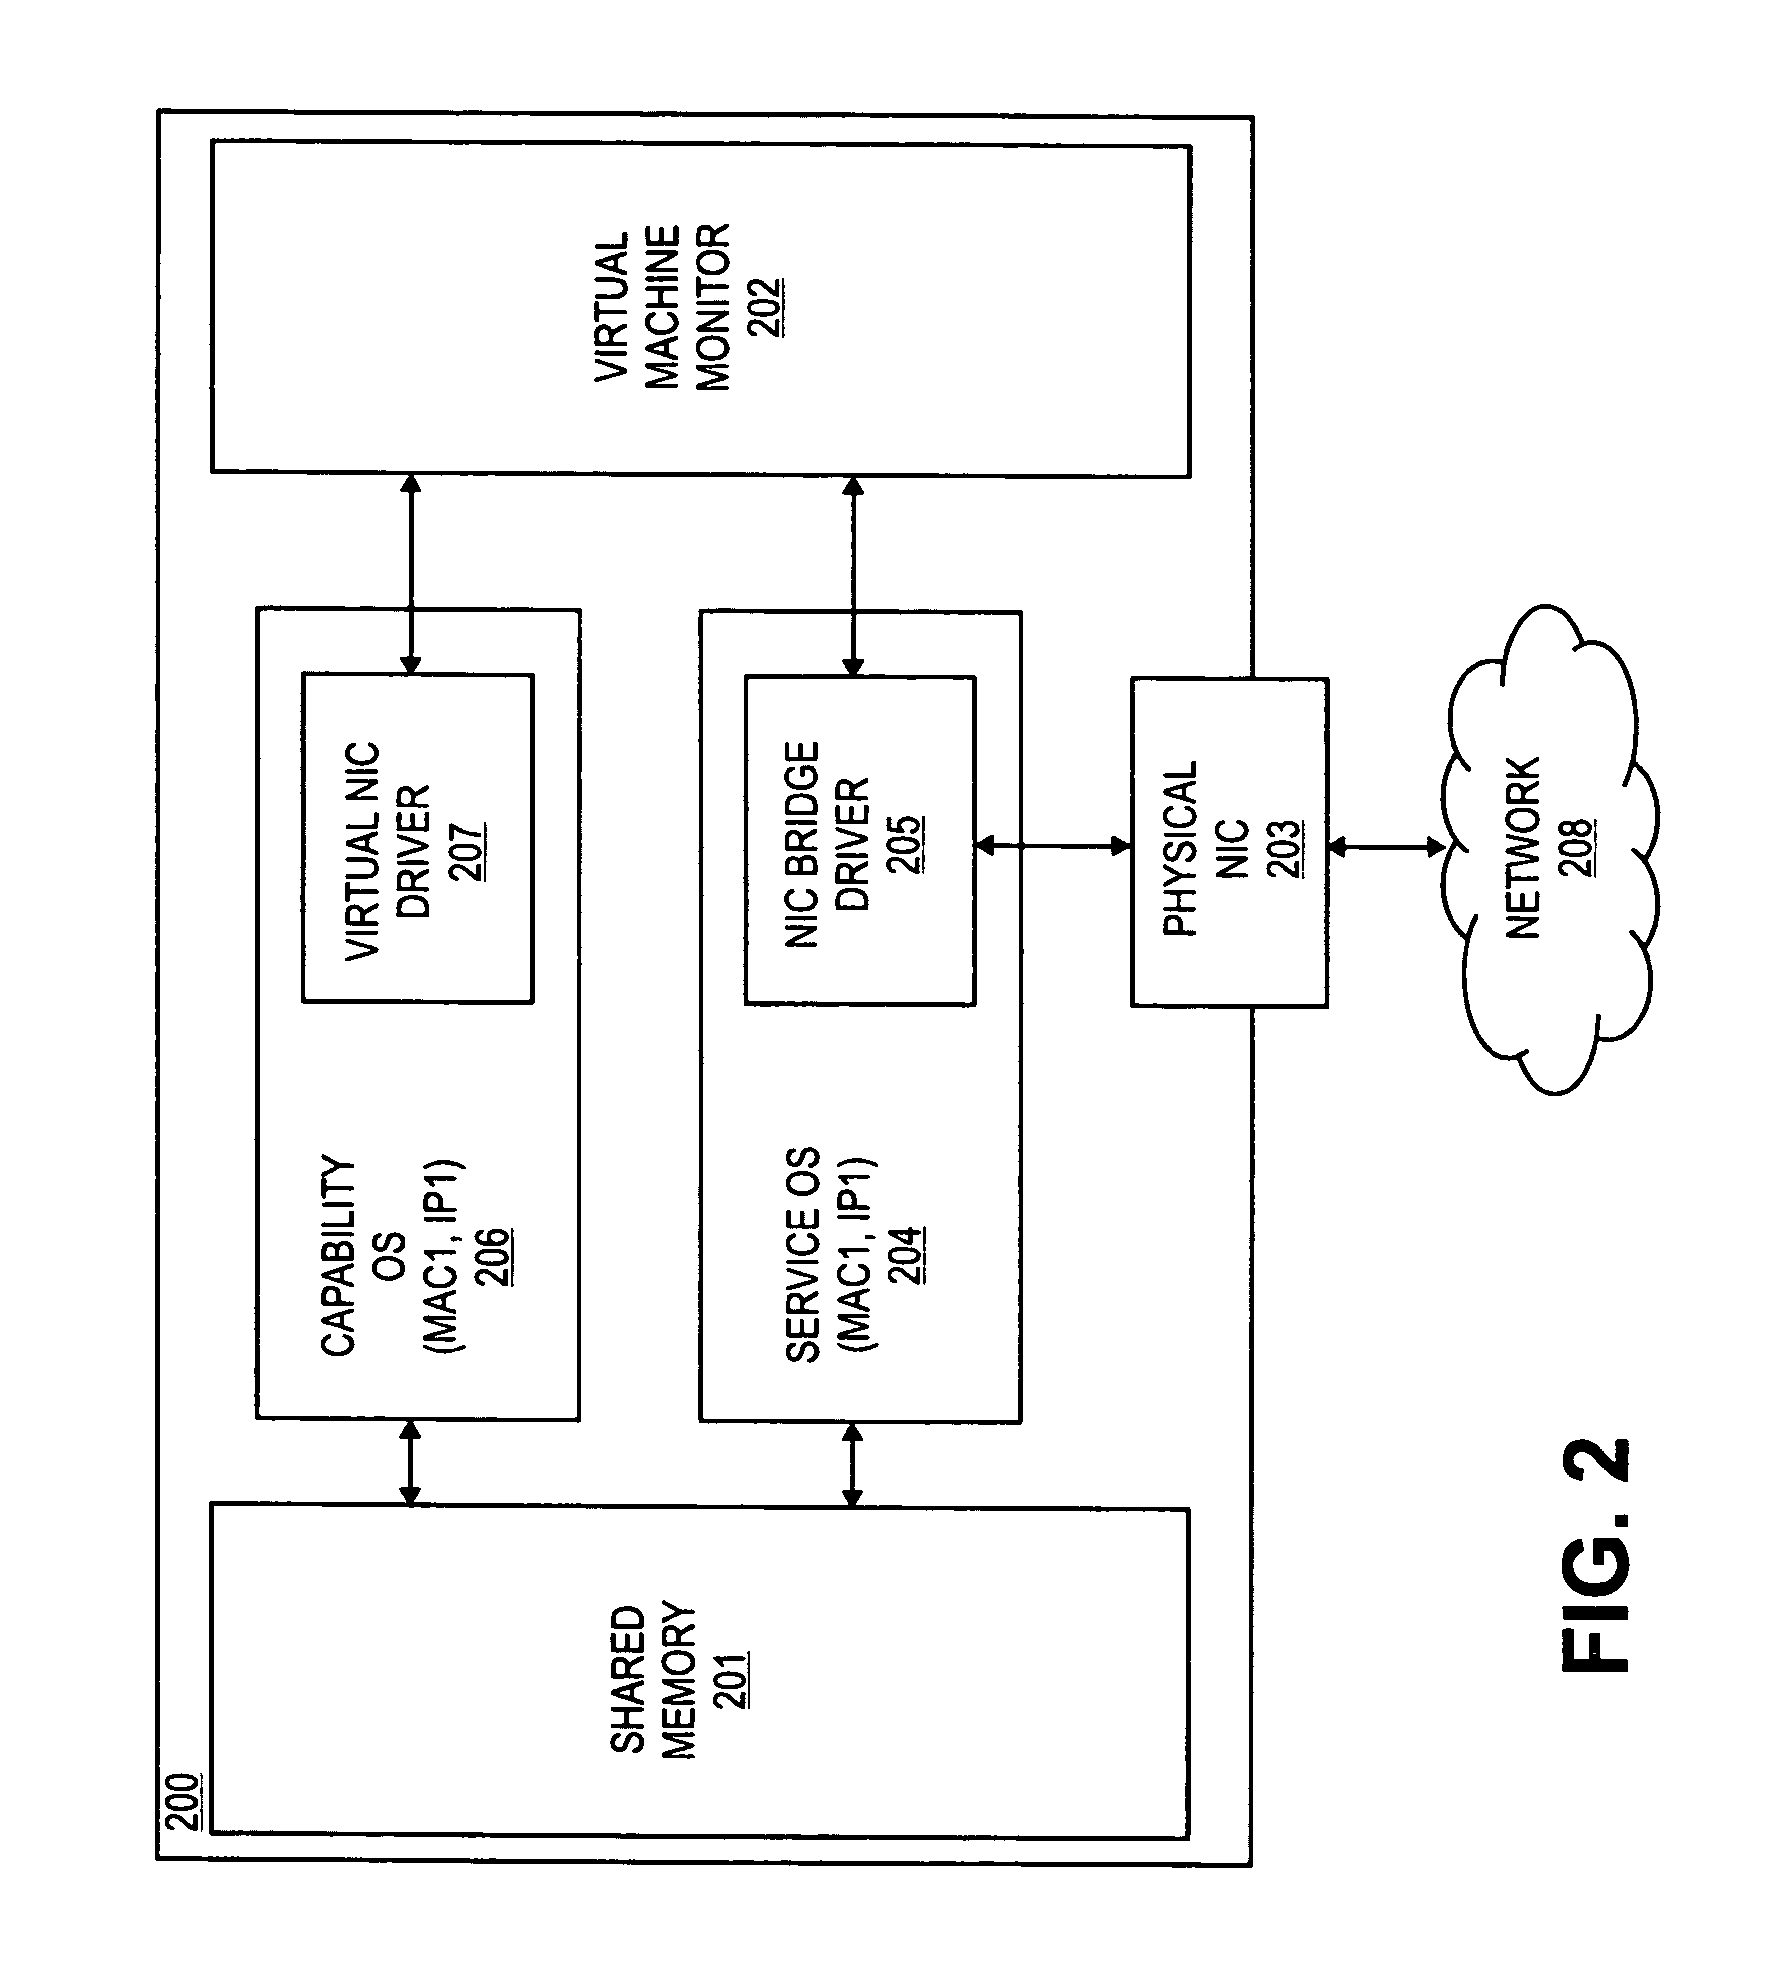 Method for supporting IP network interconnectivity between partitions in a virtualized environment